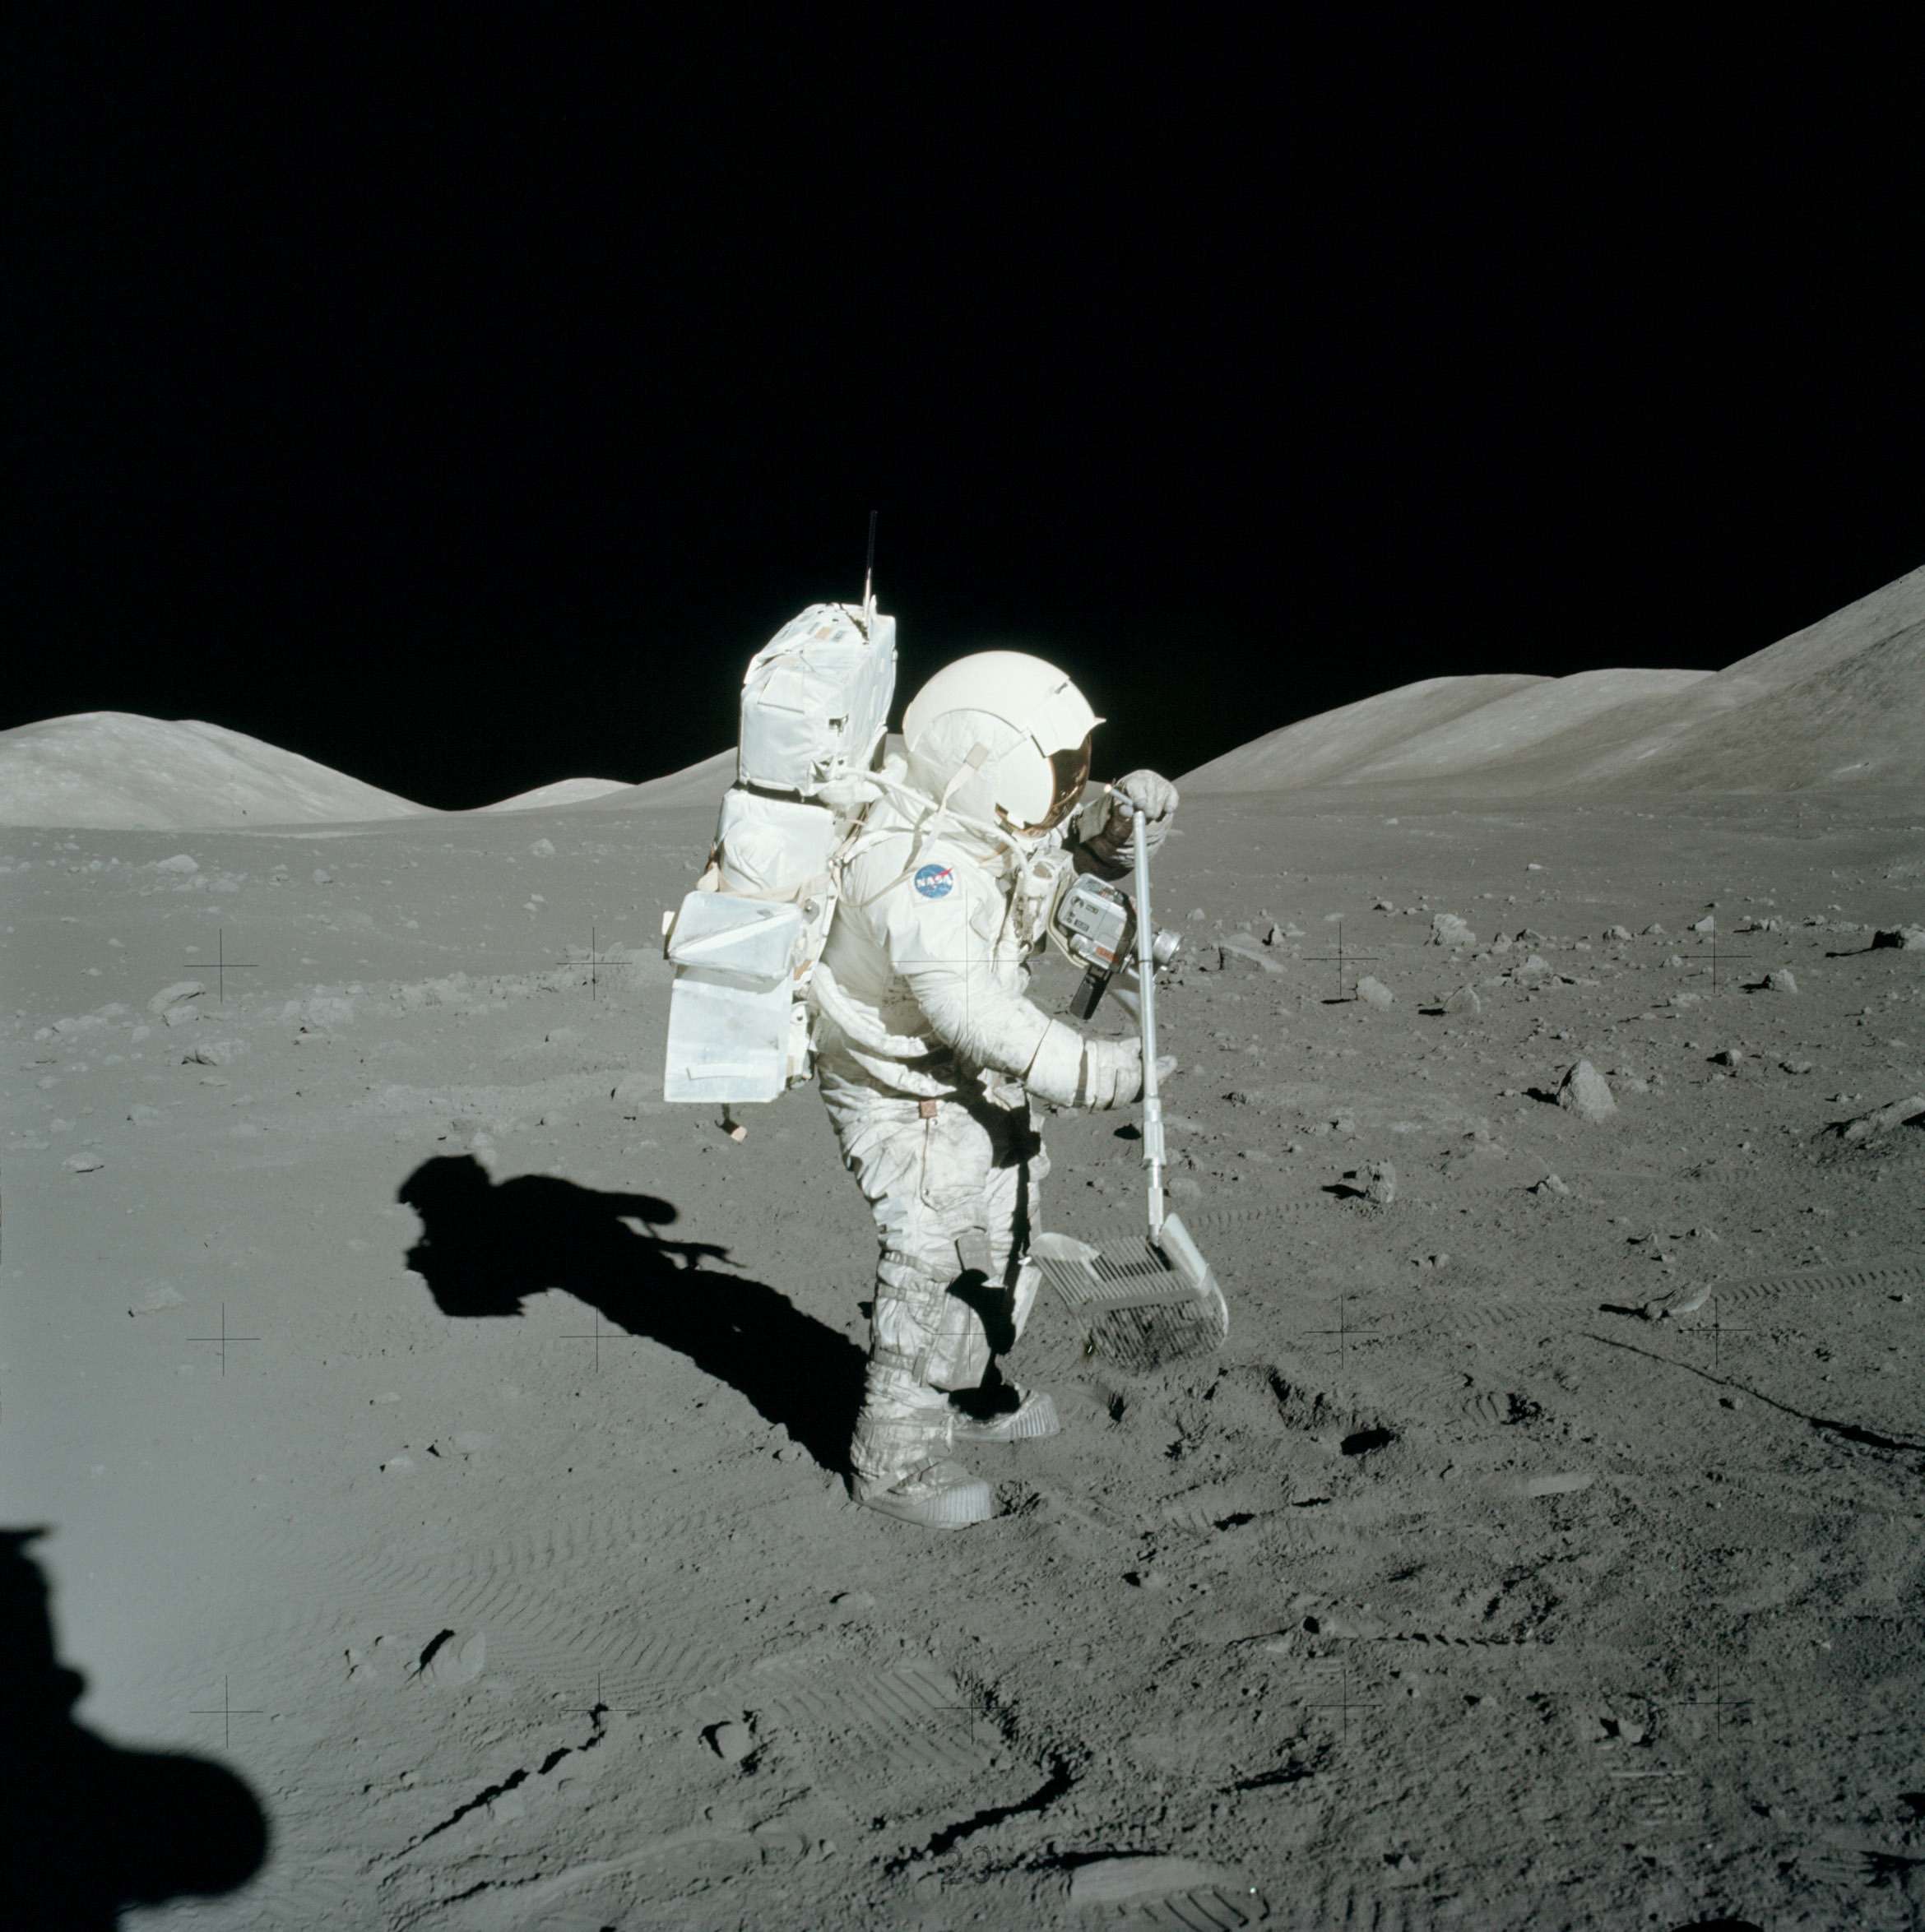 Why Did Apollo Lunar Samples Have Amino Acids In Them?